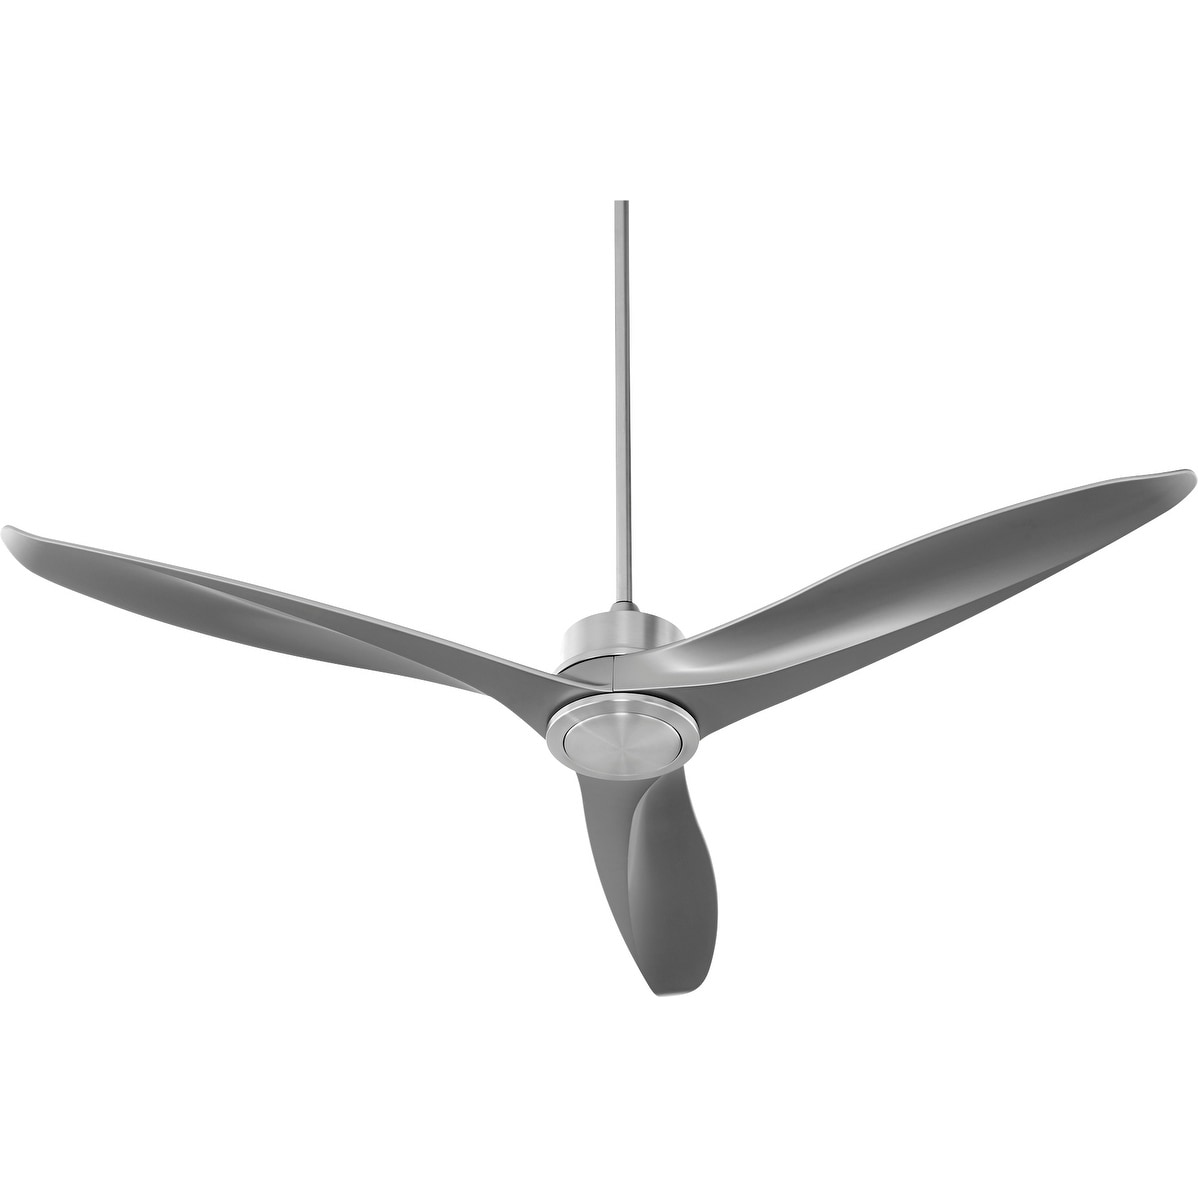 Kress Led 60 Contemporary Ceiling Fan With Integraded Led Light Kit Adaptable